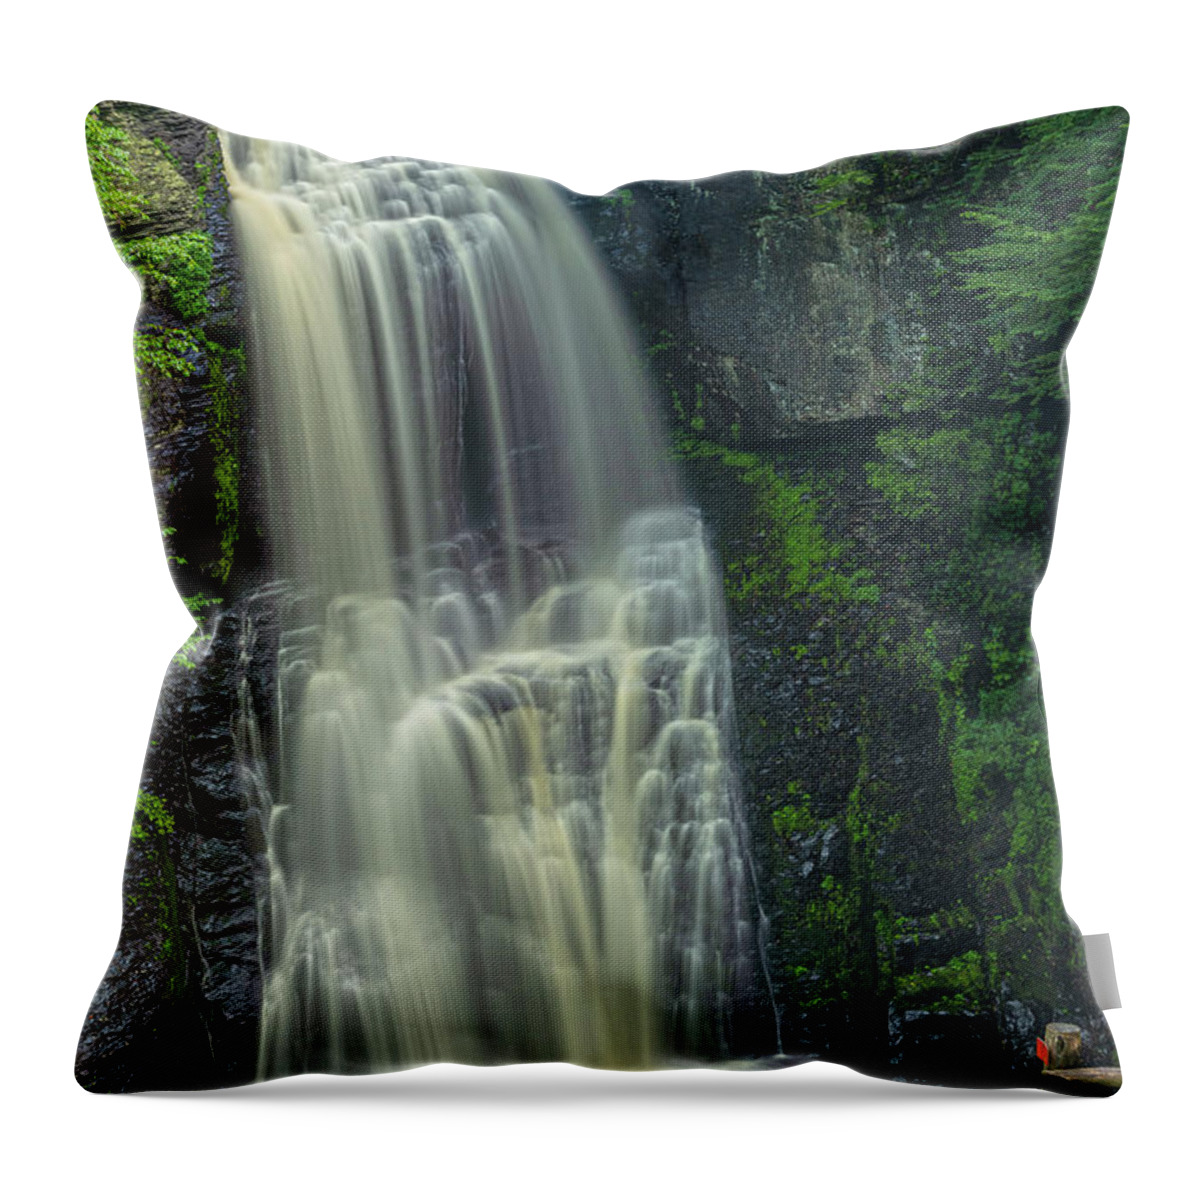 Waterfalls Throw Pillow featuring the photograph Guarded View by Angelo Marcialis